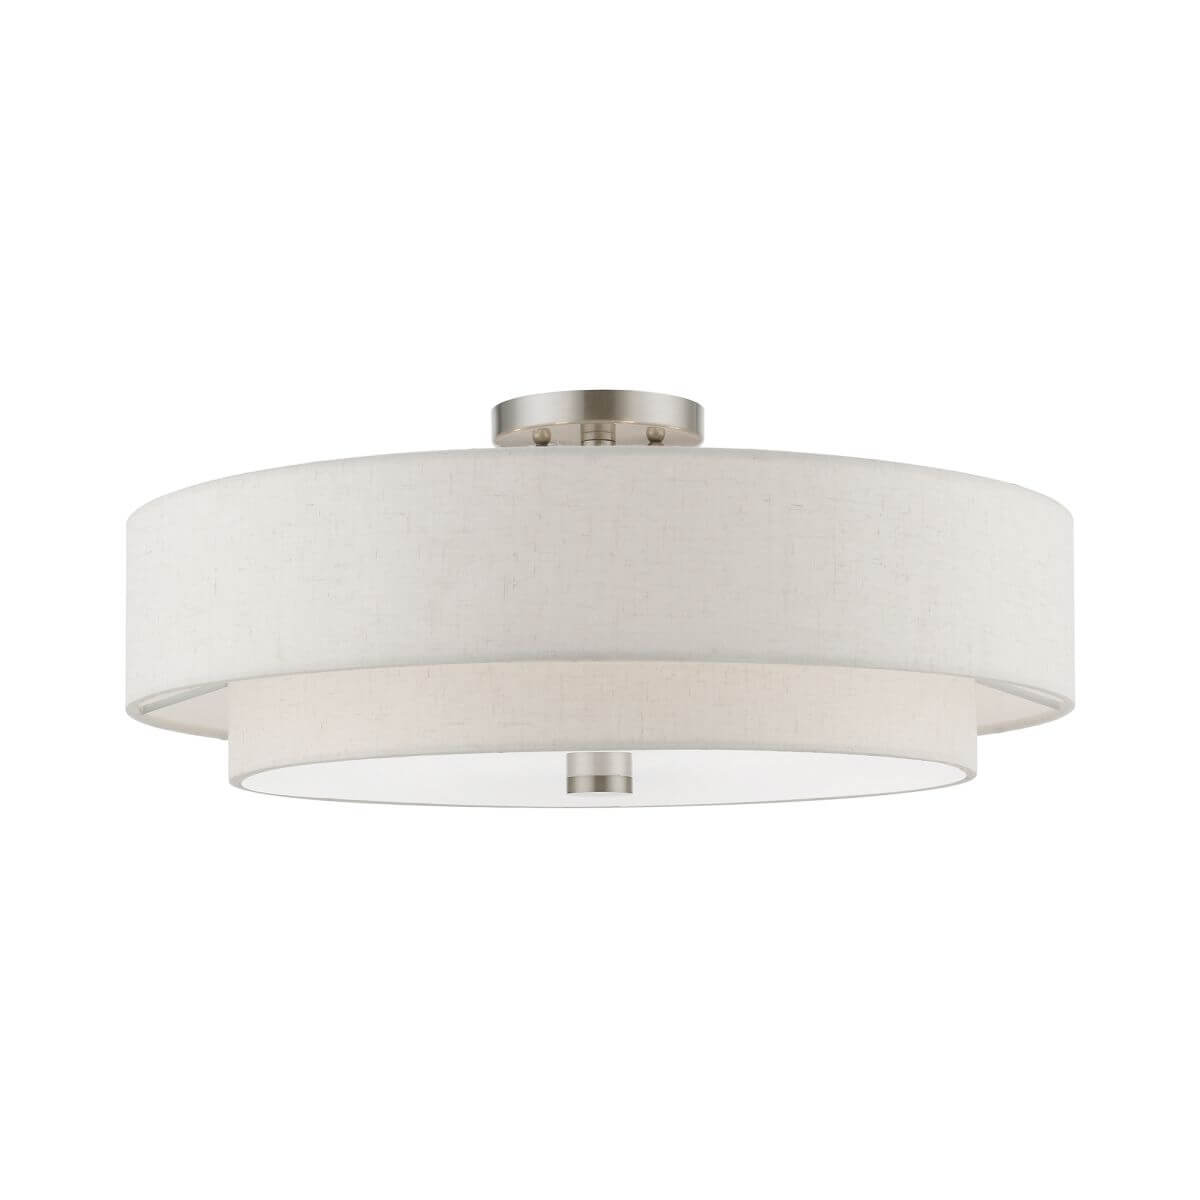 5 Light 22 inch Semi-Flush Mount in Brushed Nickel with Hand Crafted Oatmeal Color Hardback Fabric Shade - White Fabric Inside - 245474